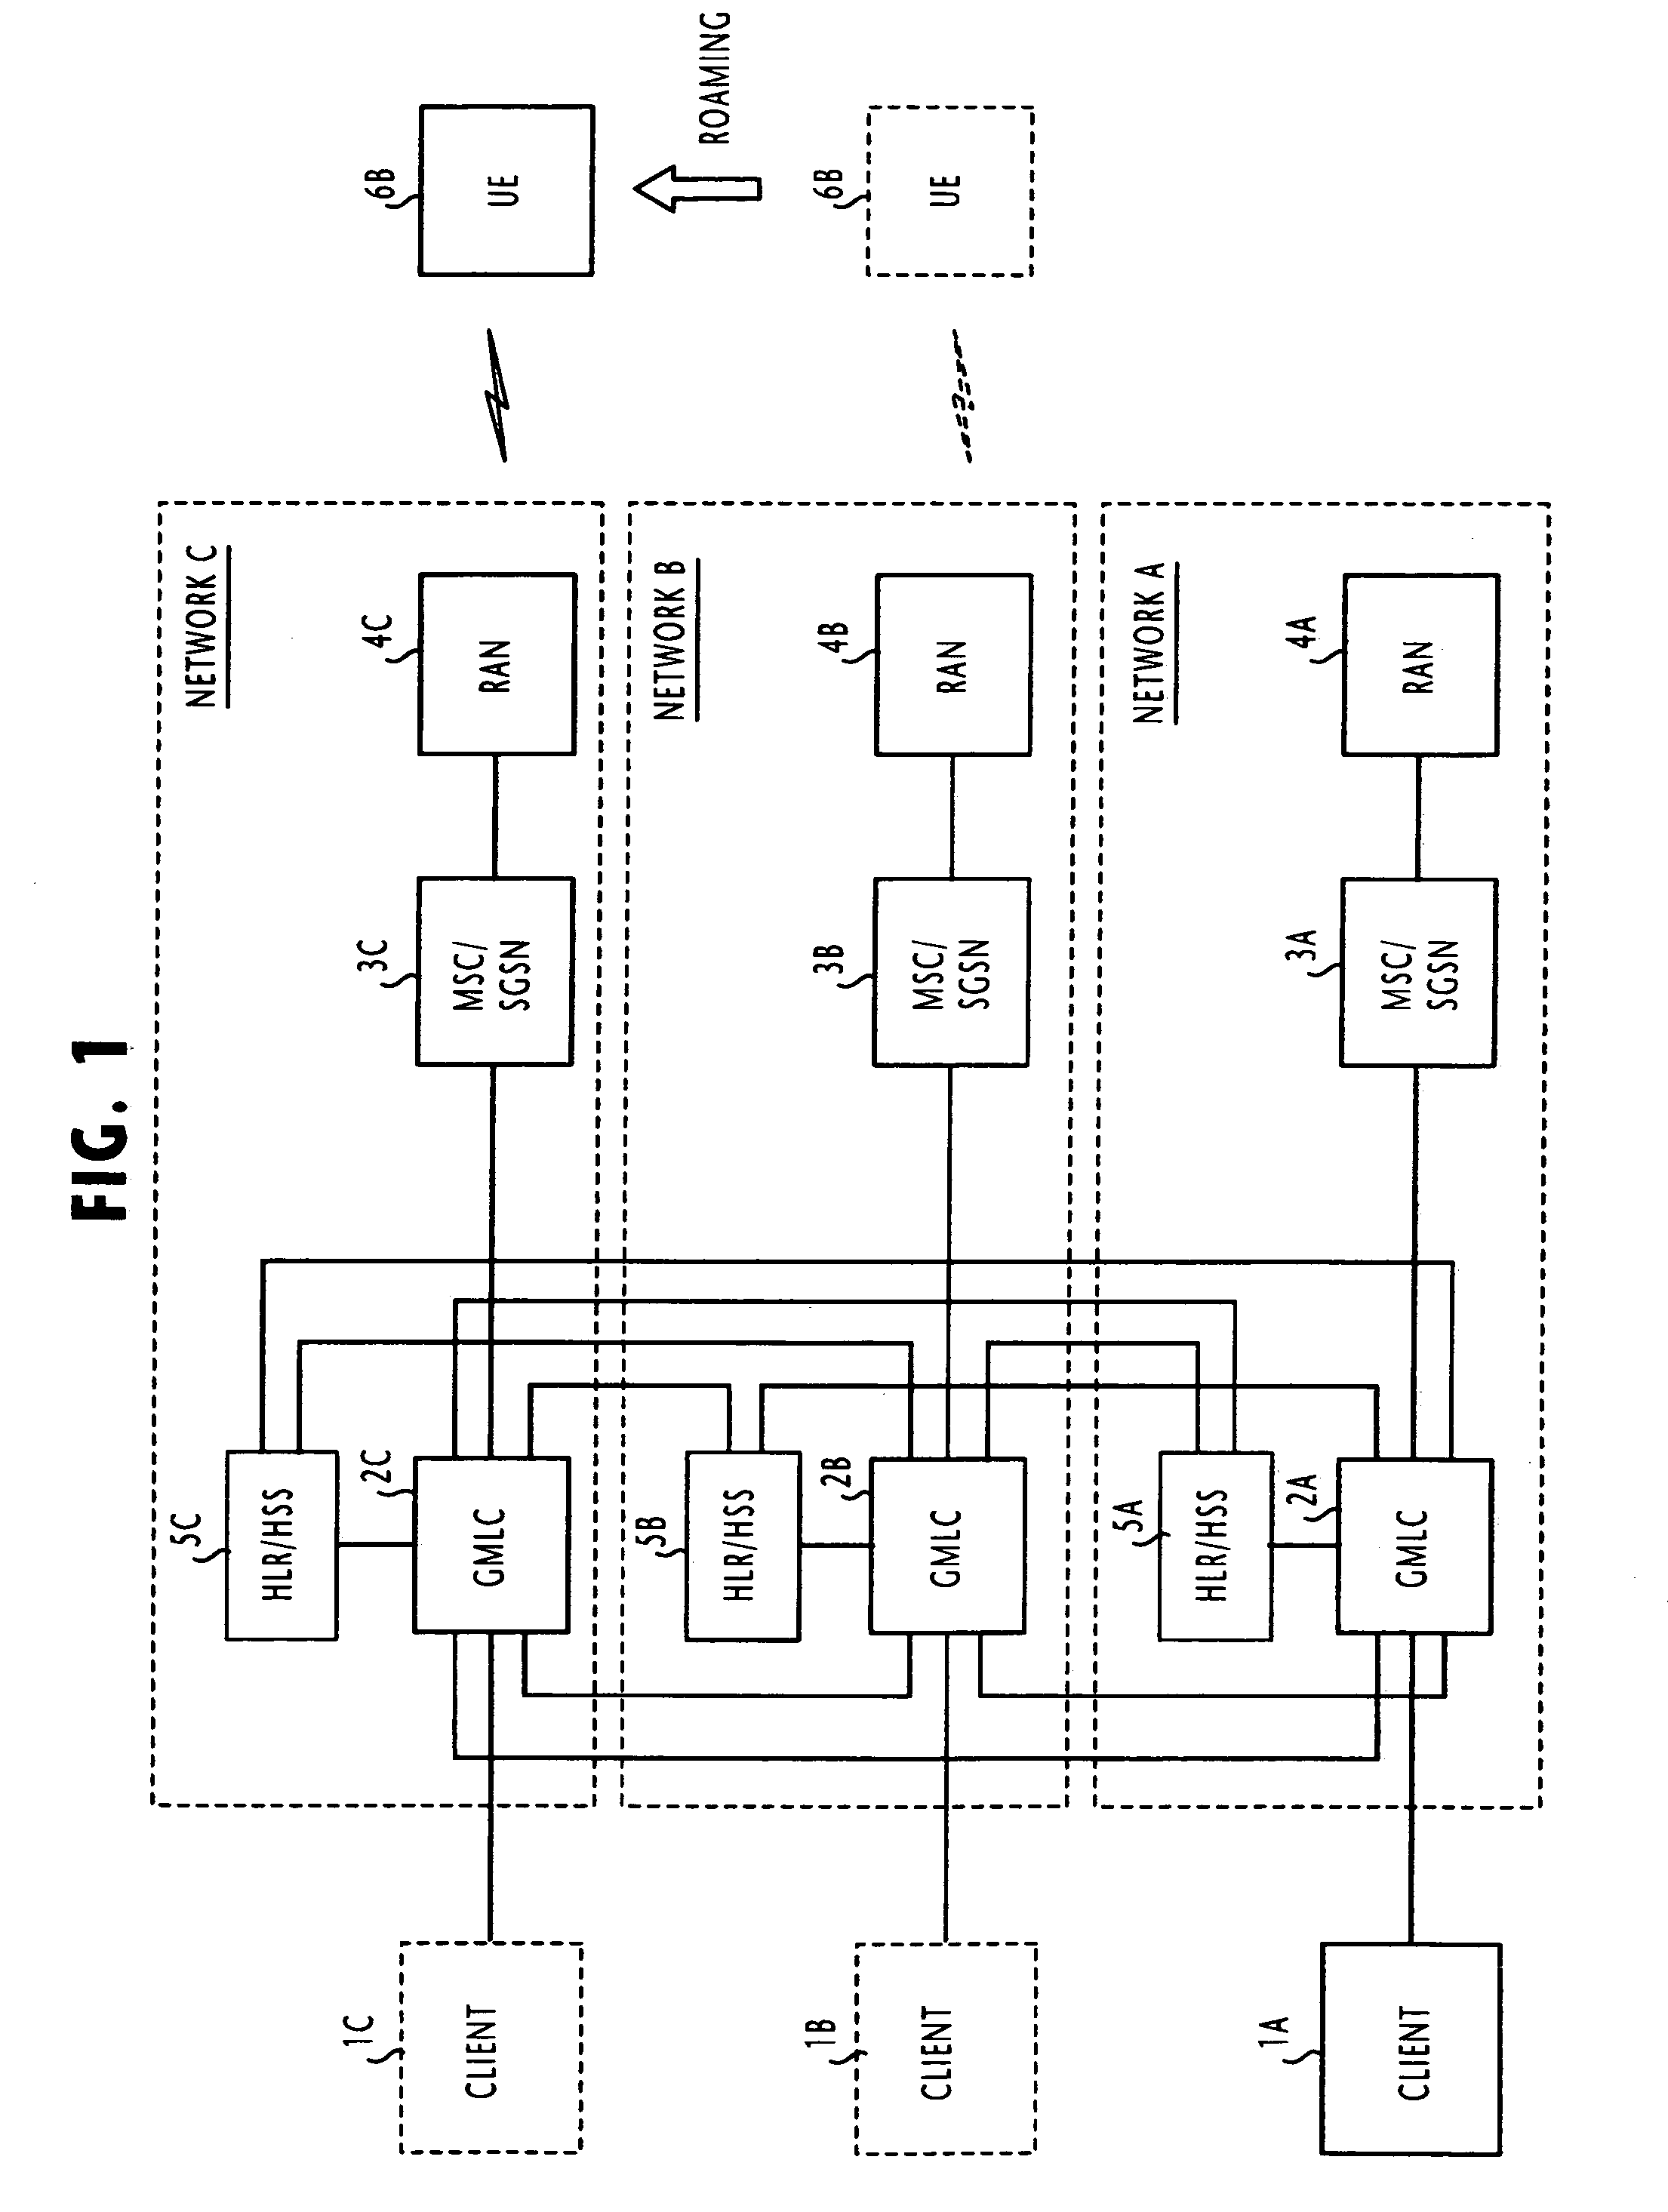 Location system and method for client terminals which provide location-based service to mobile terminals